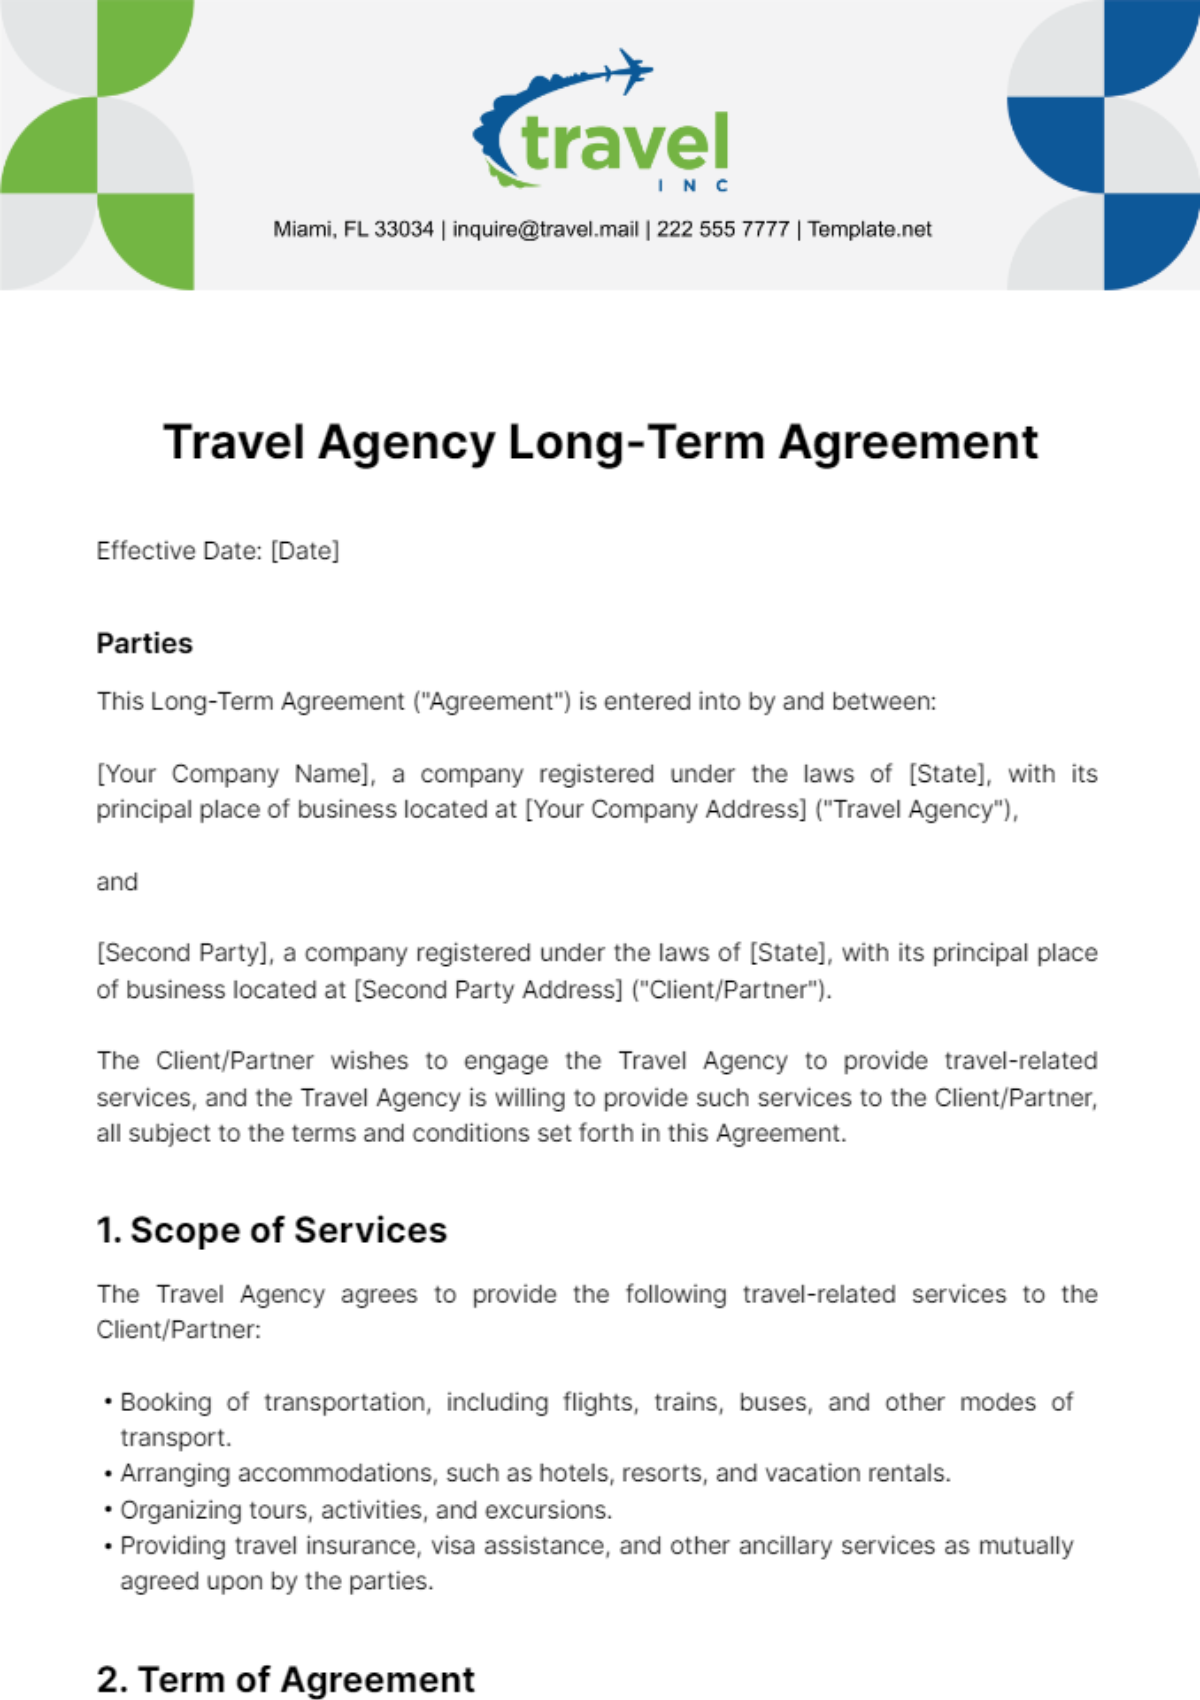 Free Travel Agency Long-Term Agreement Template